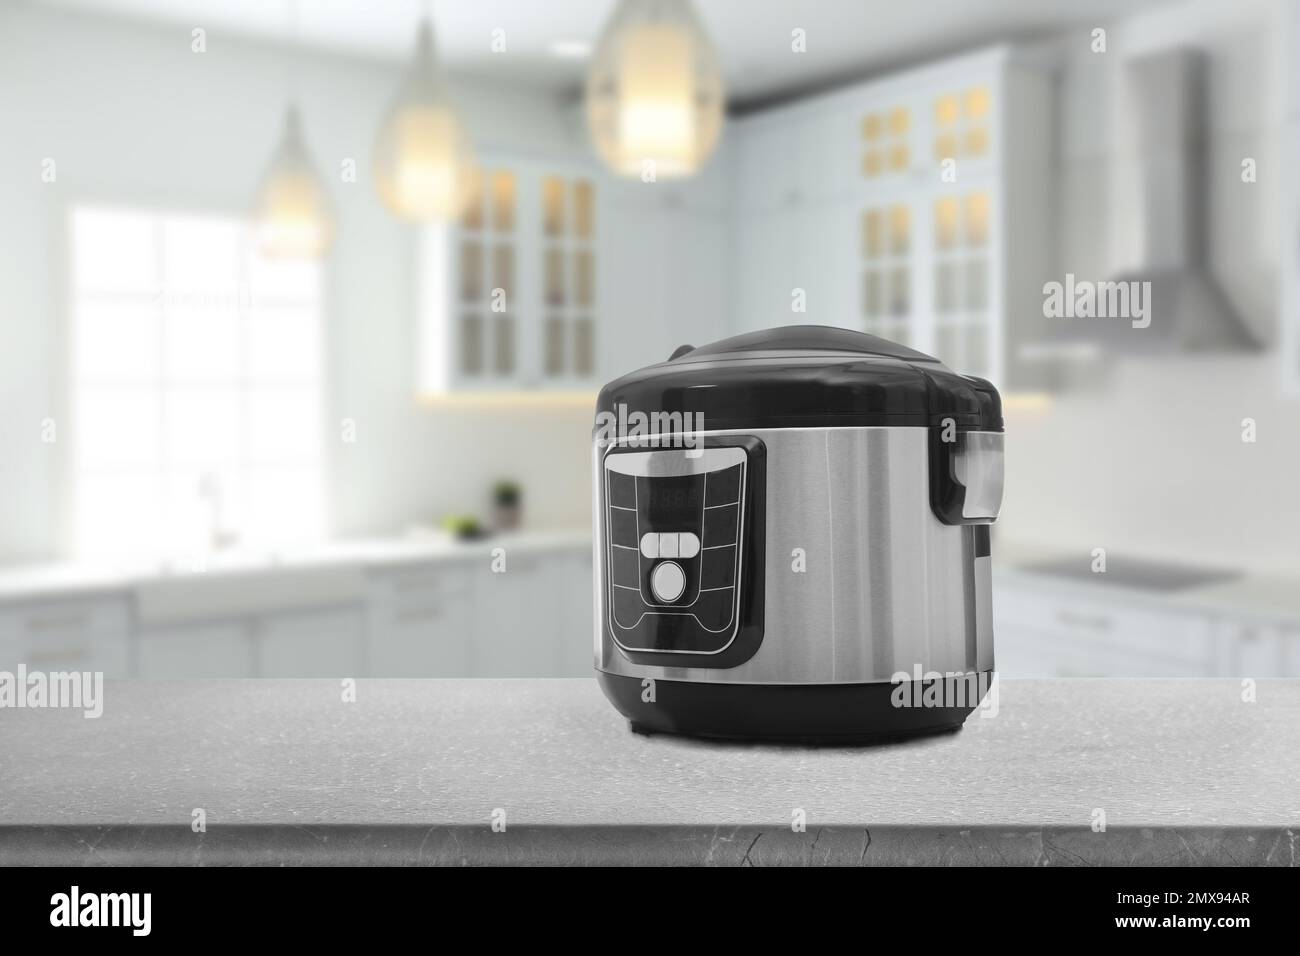 Woman using modern multi cooker in kitchen Stock Photo - Alamy